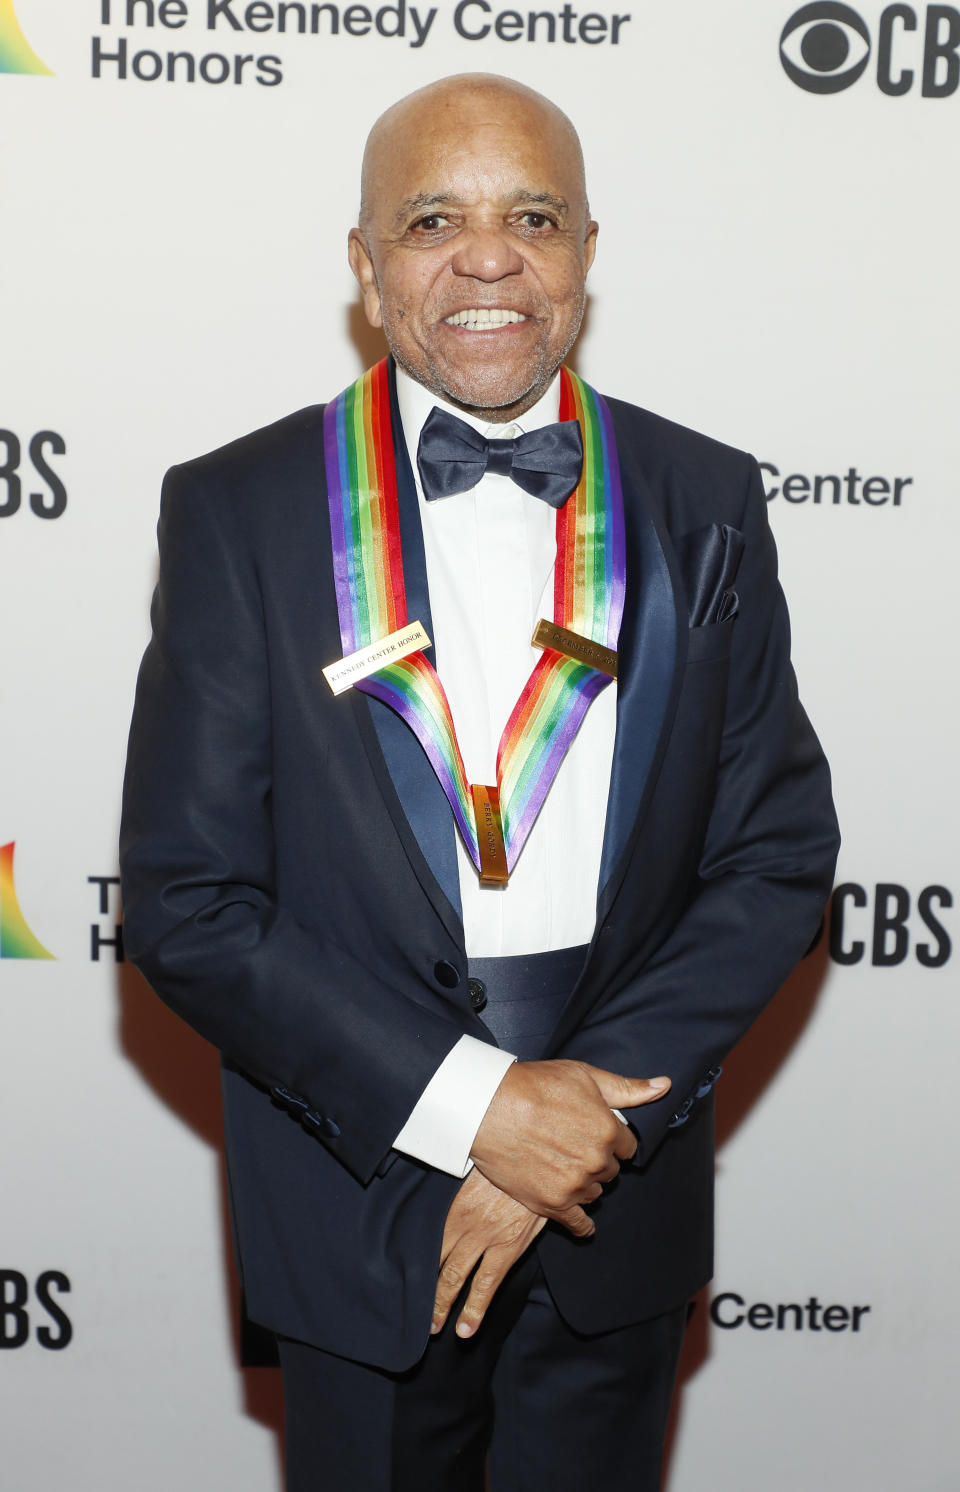 Berry Gordy attends the 44th Kennedy Center Honors at The Kennedy Center on December 05, 2021 as an honoree